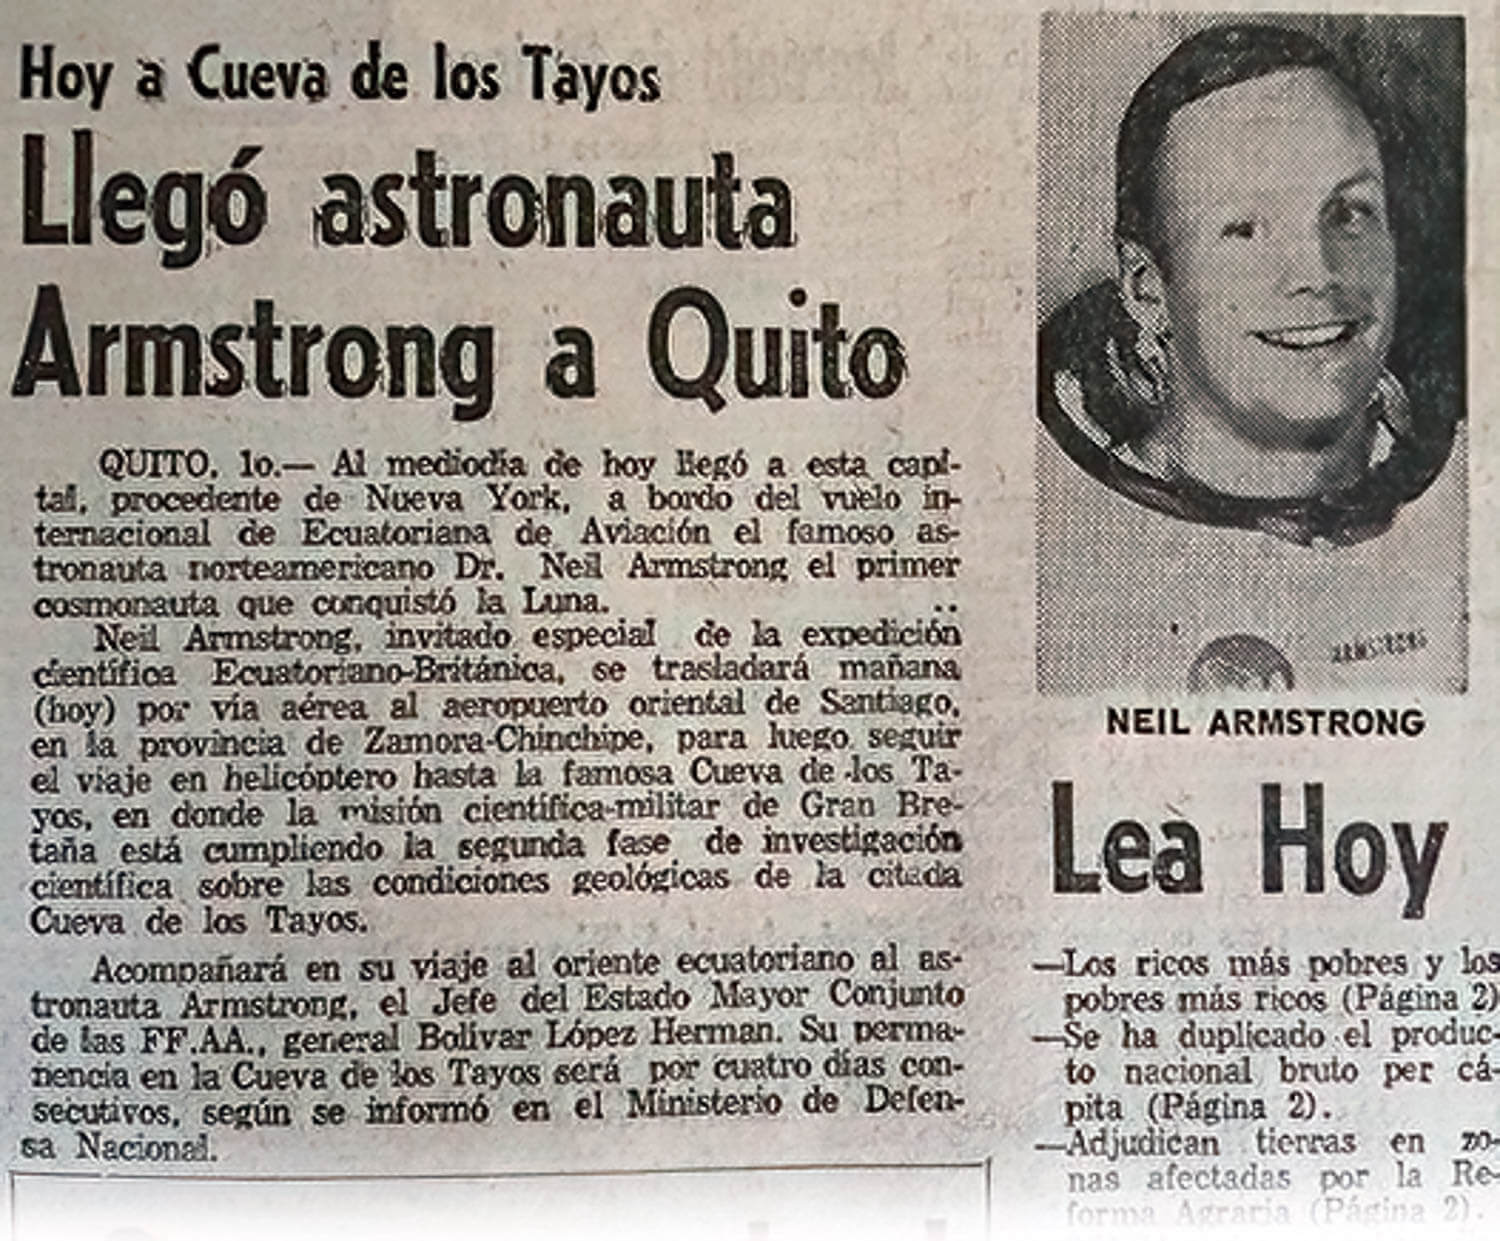 Newspaper about the arrival of Neil Armstrong to Quito